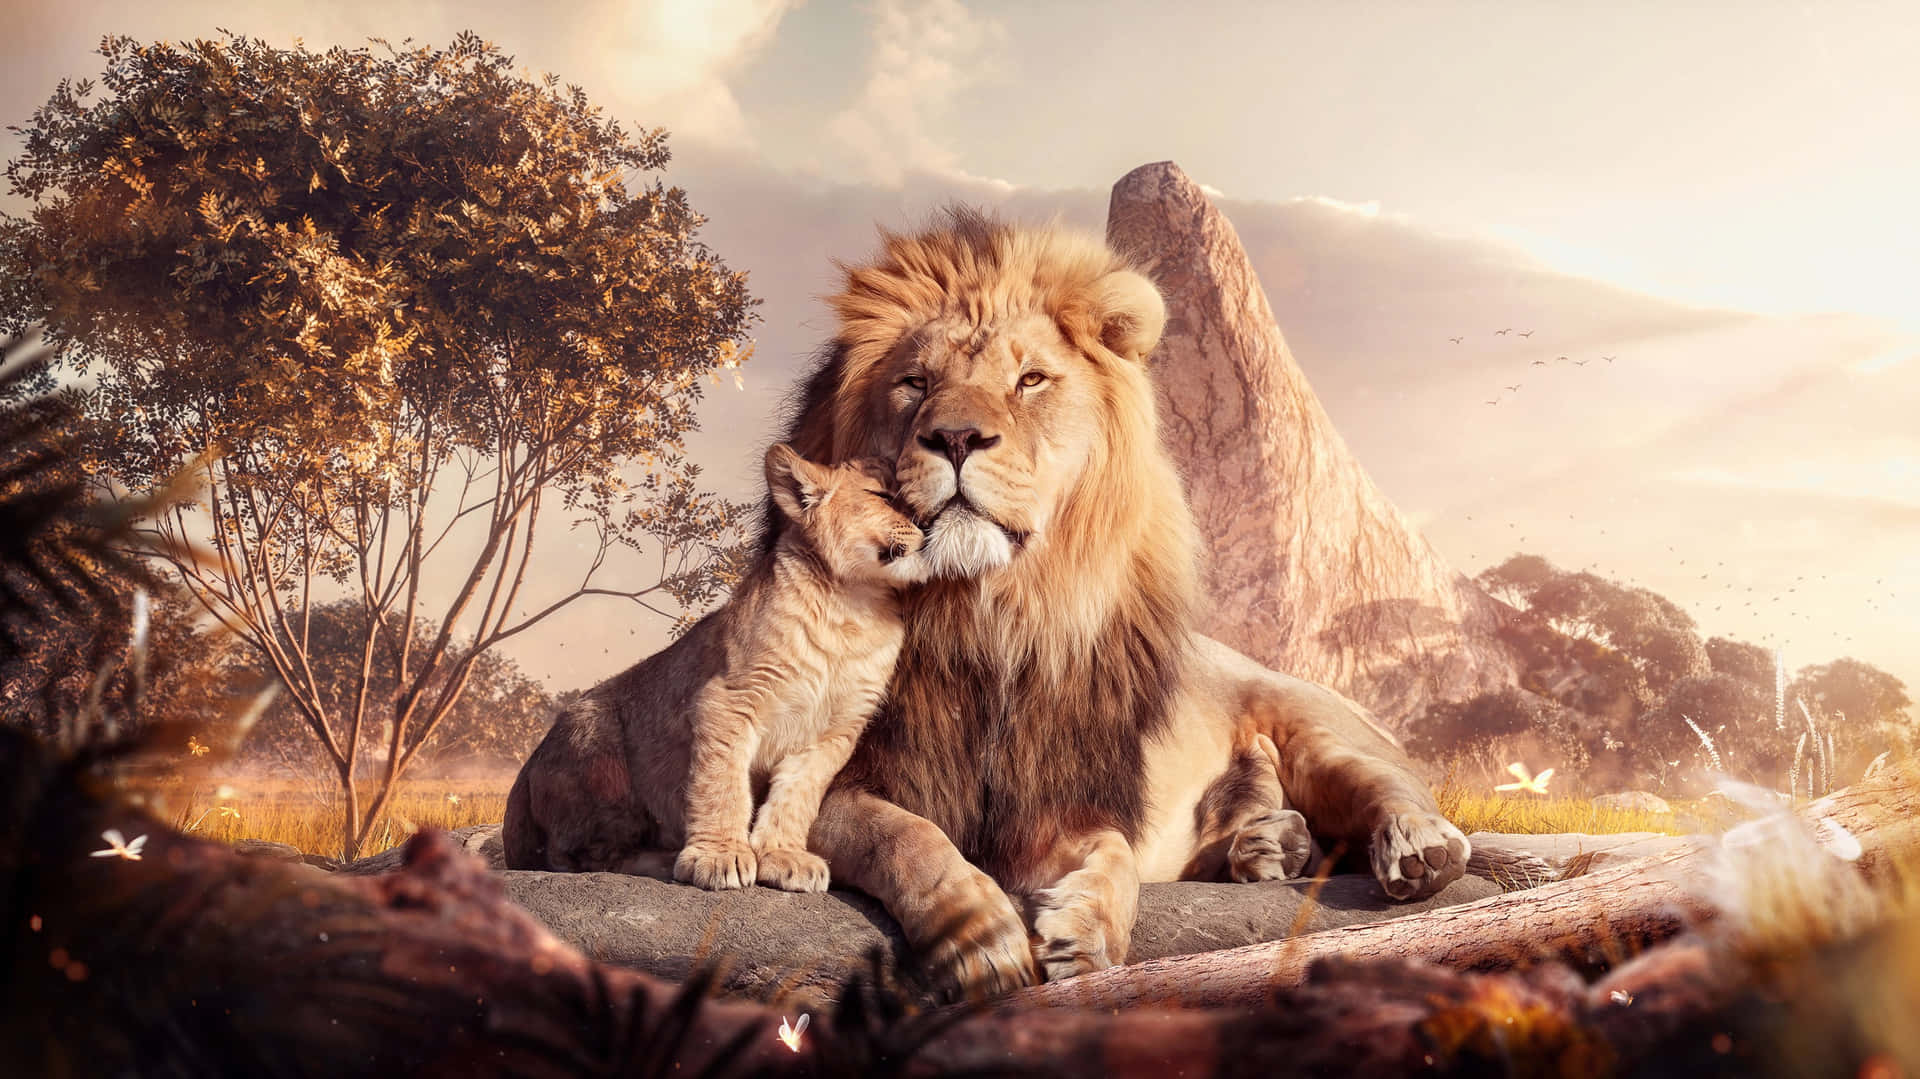 3D Mufasa And Simba Lion King Picture